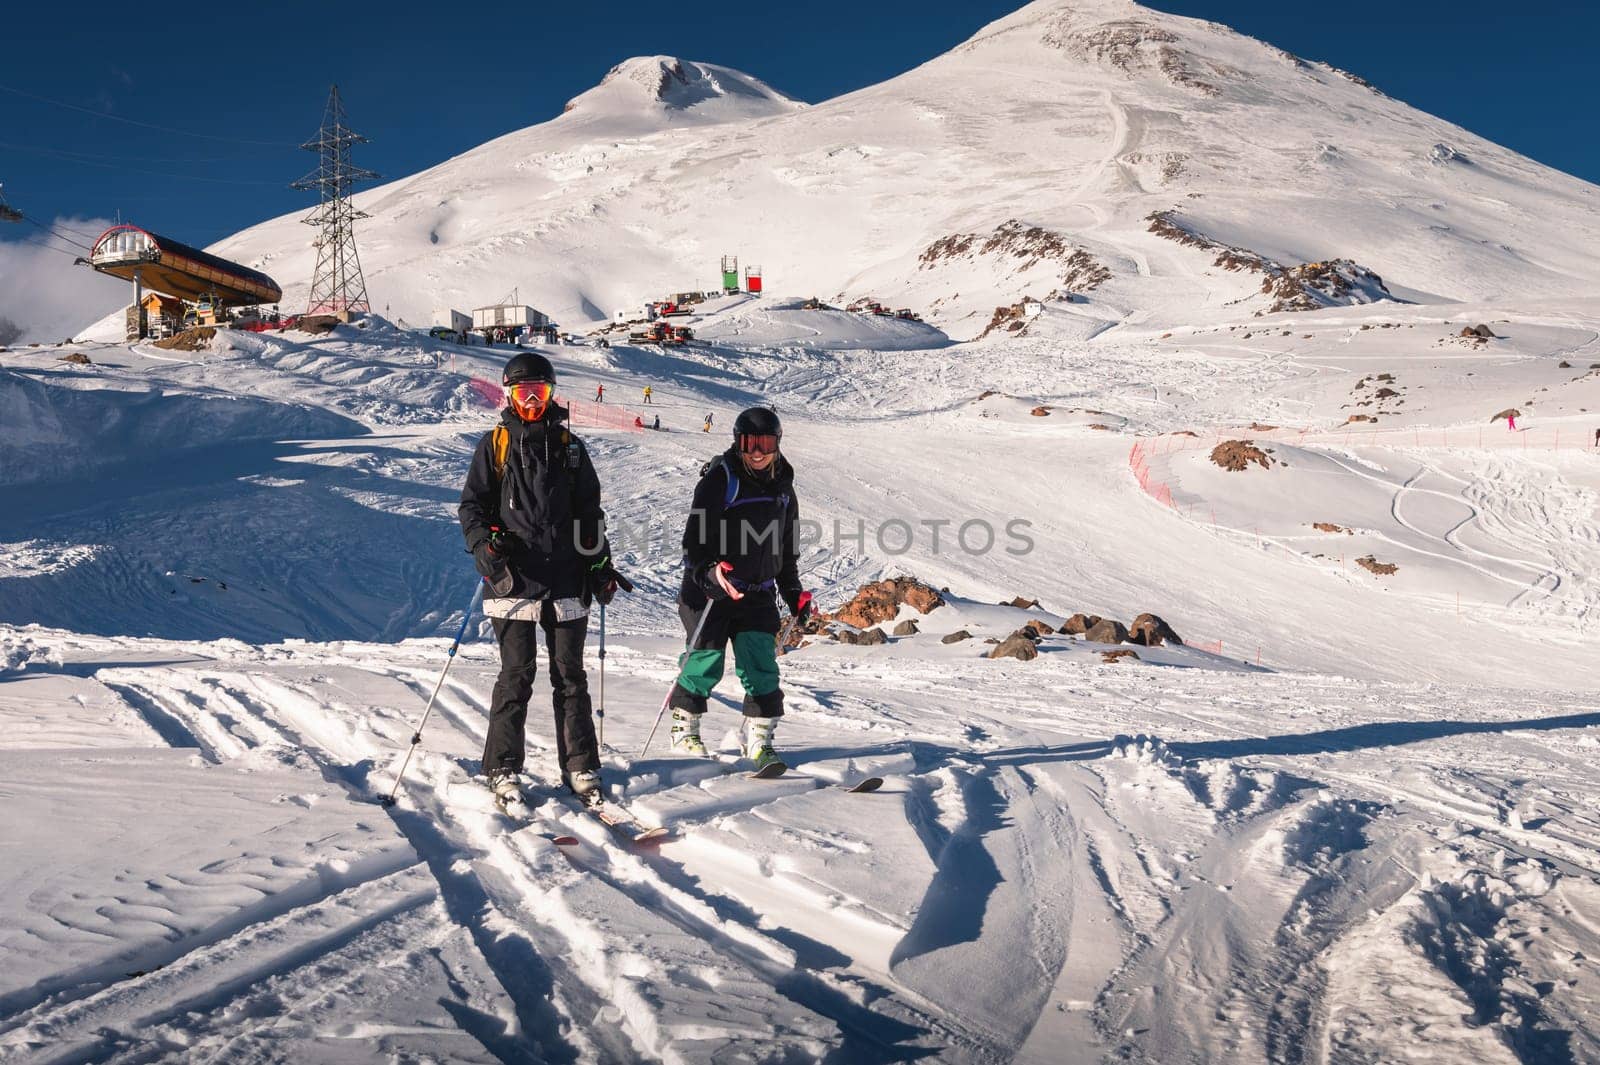 pair of skiers standing on skis side by side in a helmet and goggles getting ready for the descent. The concept of winter friendly outdoor recreation in the mountains by yanik88